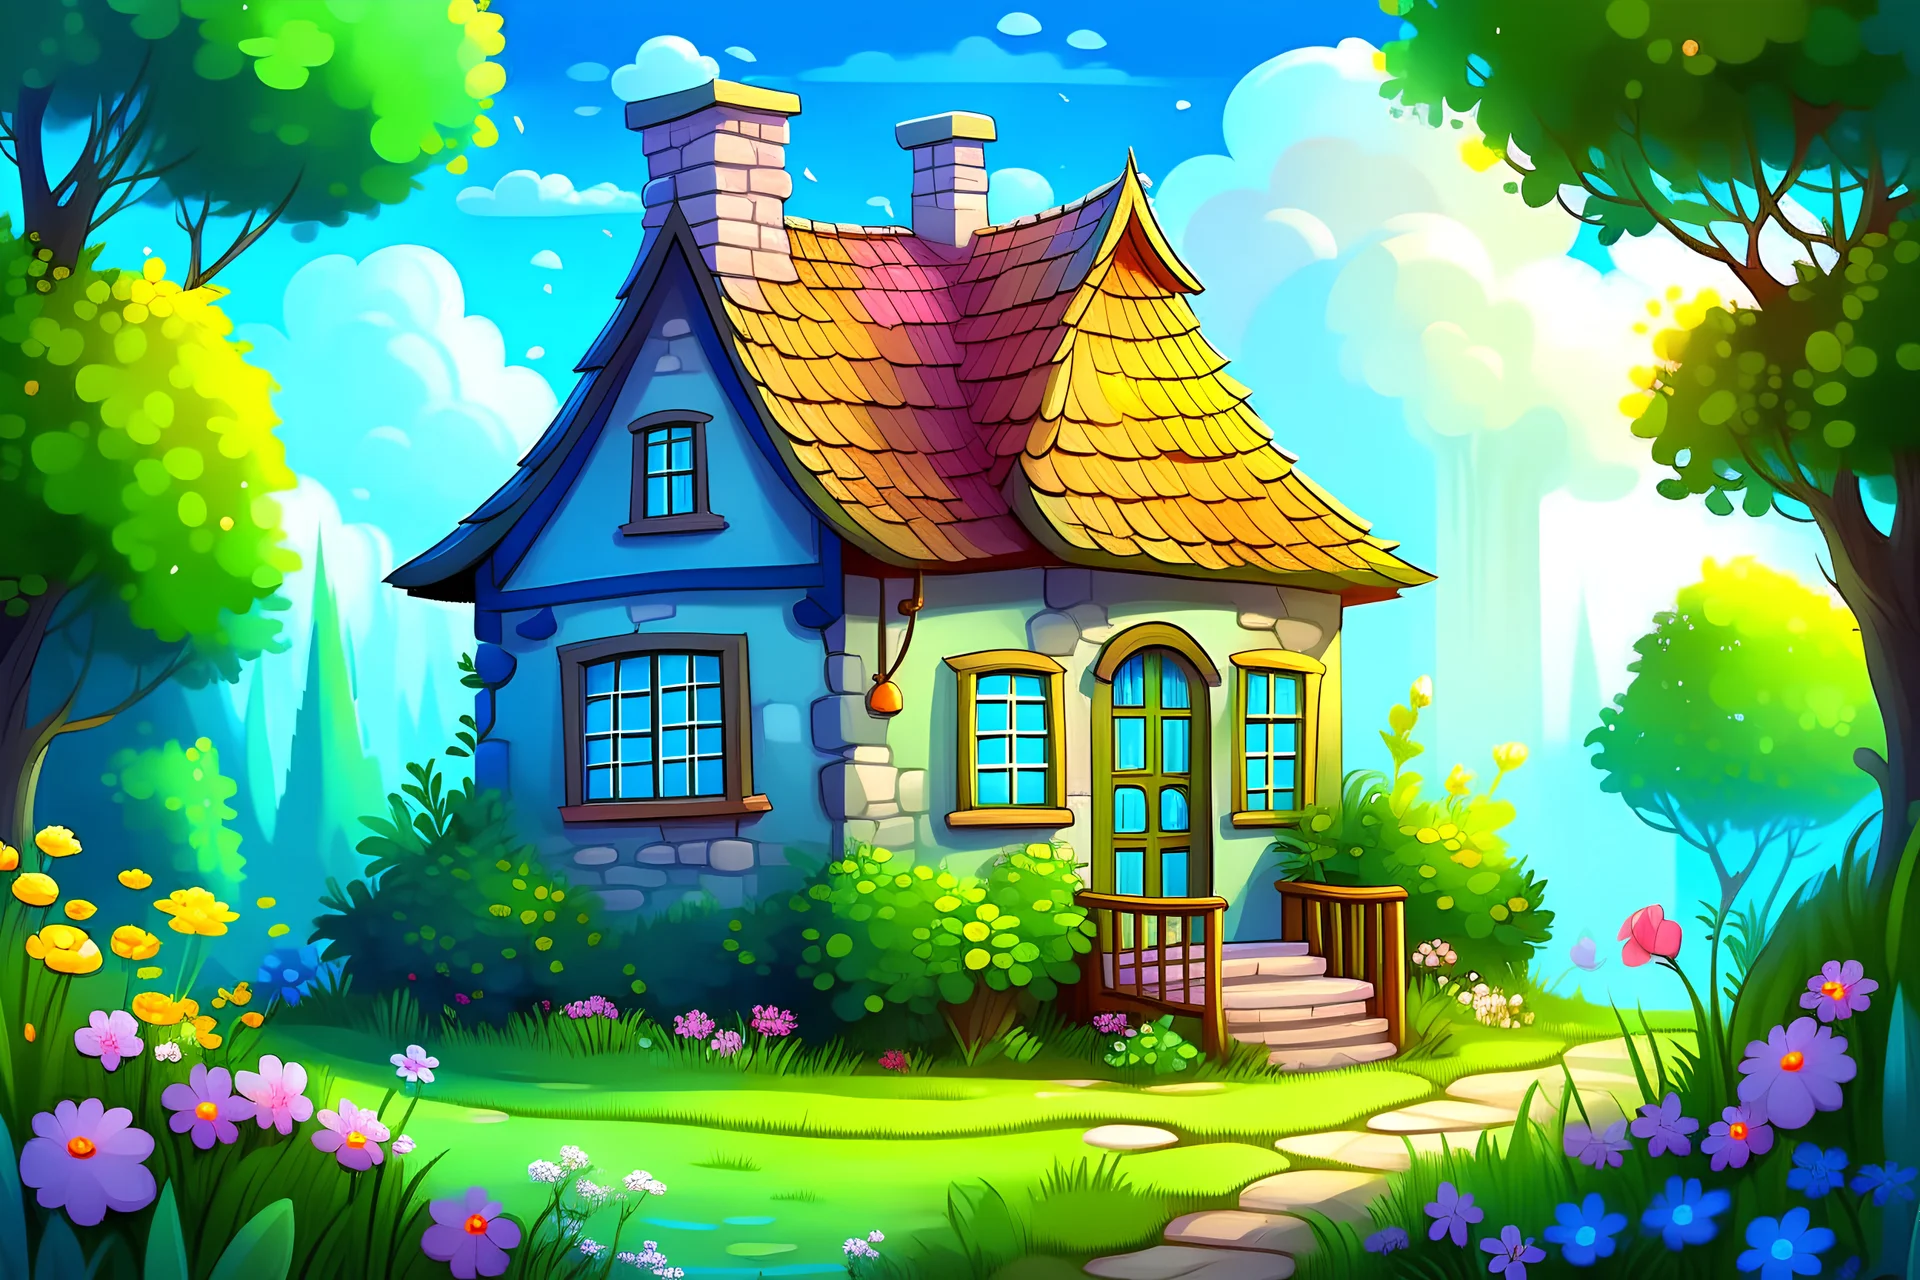 Generate an illustration depicting a quaint cottage nestled amidst lush greenery, with a smoke gently rising from the chimney. The cottage should exude a cozy and inviting atmosphere, with colorful flowers adorning the windowsills and a path leading up to the front door.